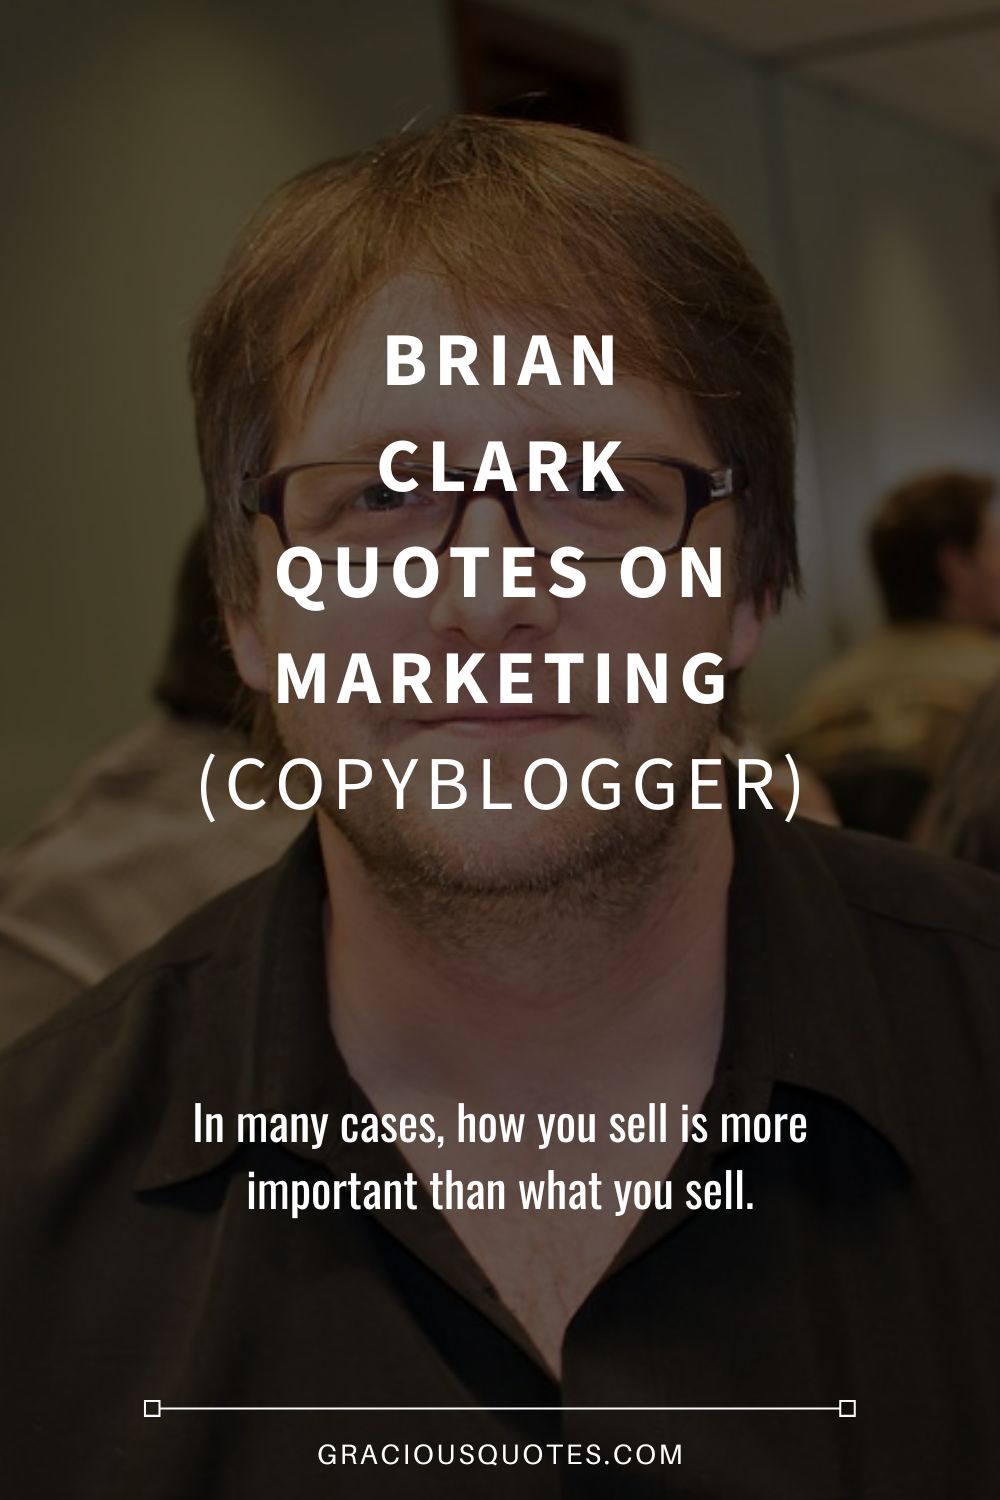 Brian Clark Quotes on Marketing (COPYBLOGGER) - Gracious Quotes